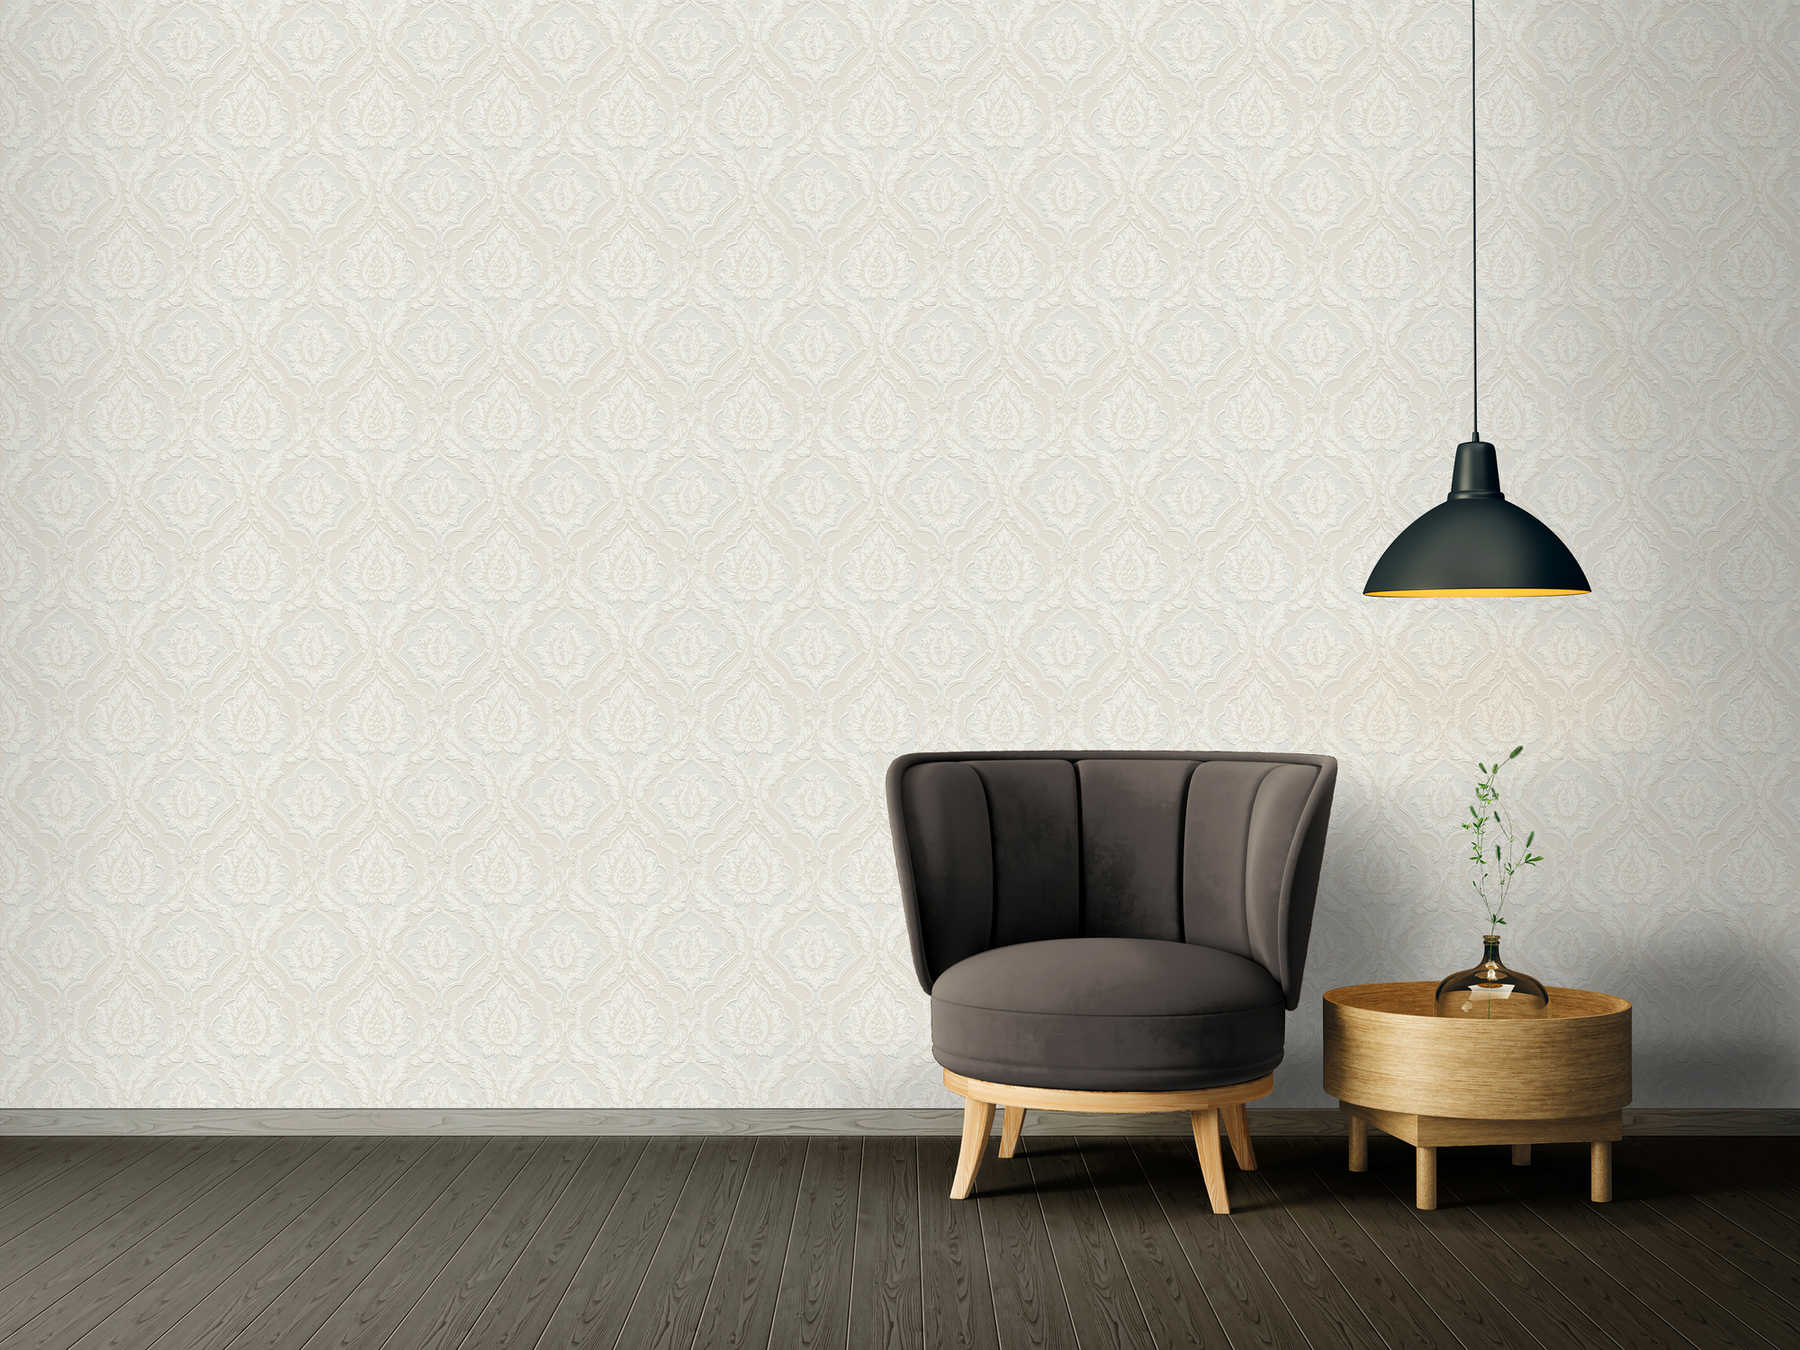             Ornament wallpaper with glitter effect & 3D structure - white
        